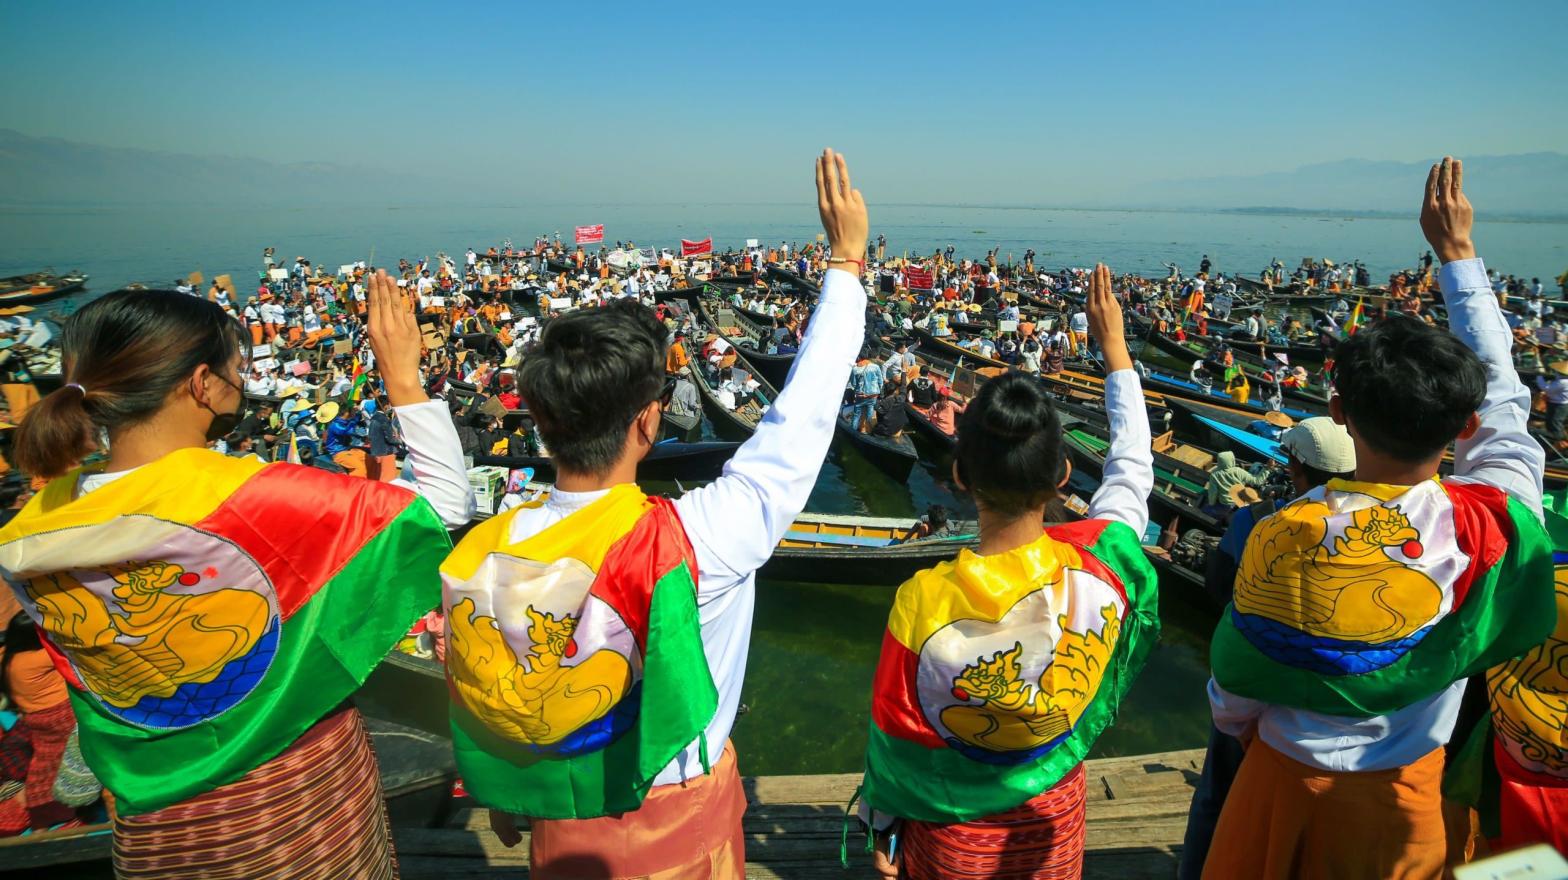 Protesters wearing traditional Shan dress make the three-figner salute as others hold signs during a demonstration against the Myanmar military coup in Inle Lake, Shan state on February 11, 2021. (Photo: Calito/AFP, Getty Images)